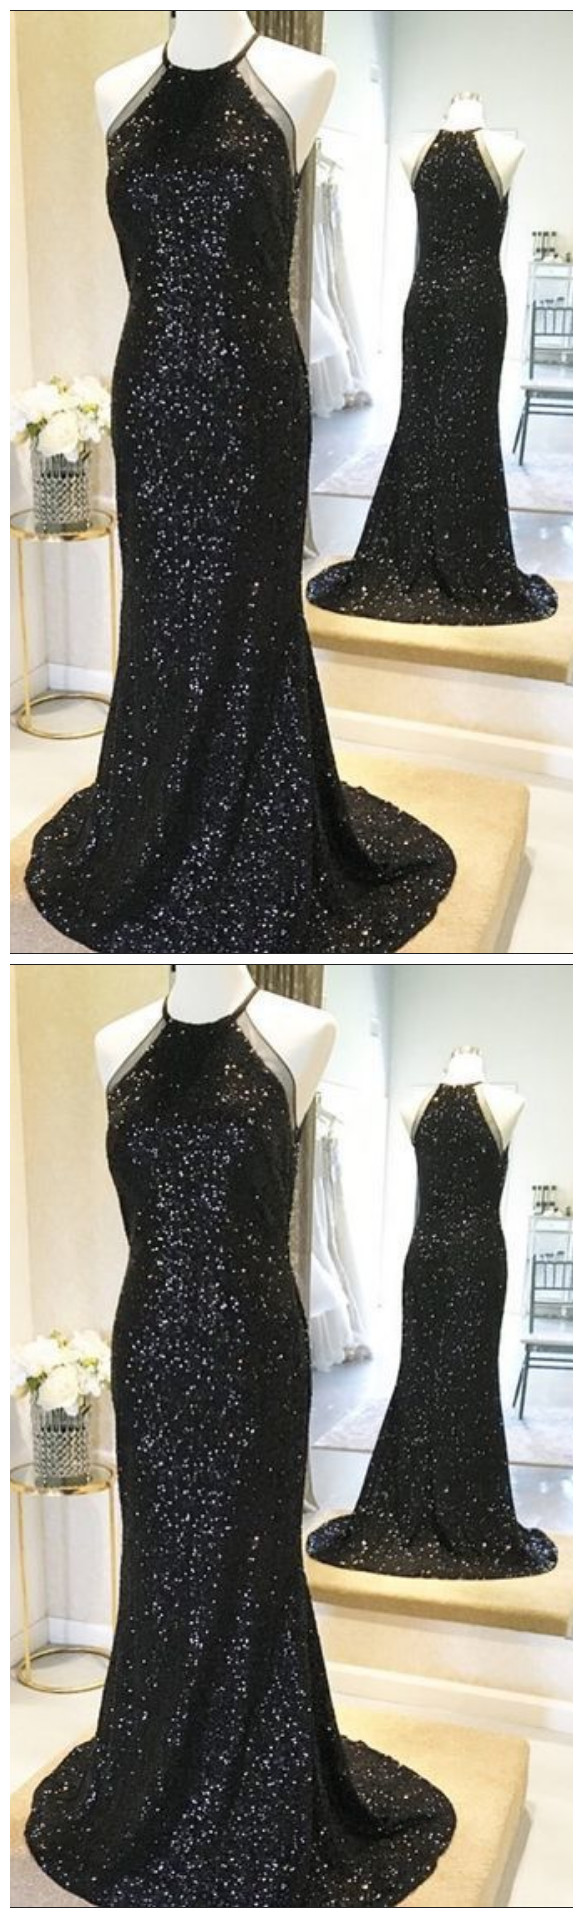 Gorgeous Sparkly Sequins Prom Dress, Black Bridesmaid Dress, Glitter Evening Gowns